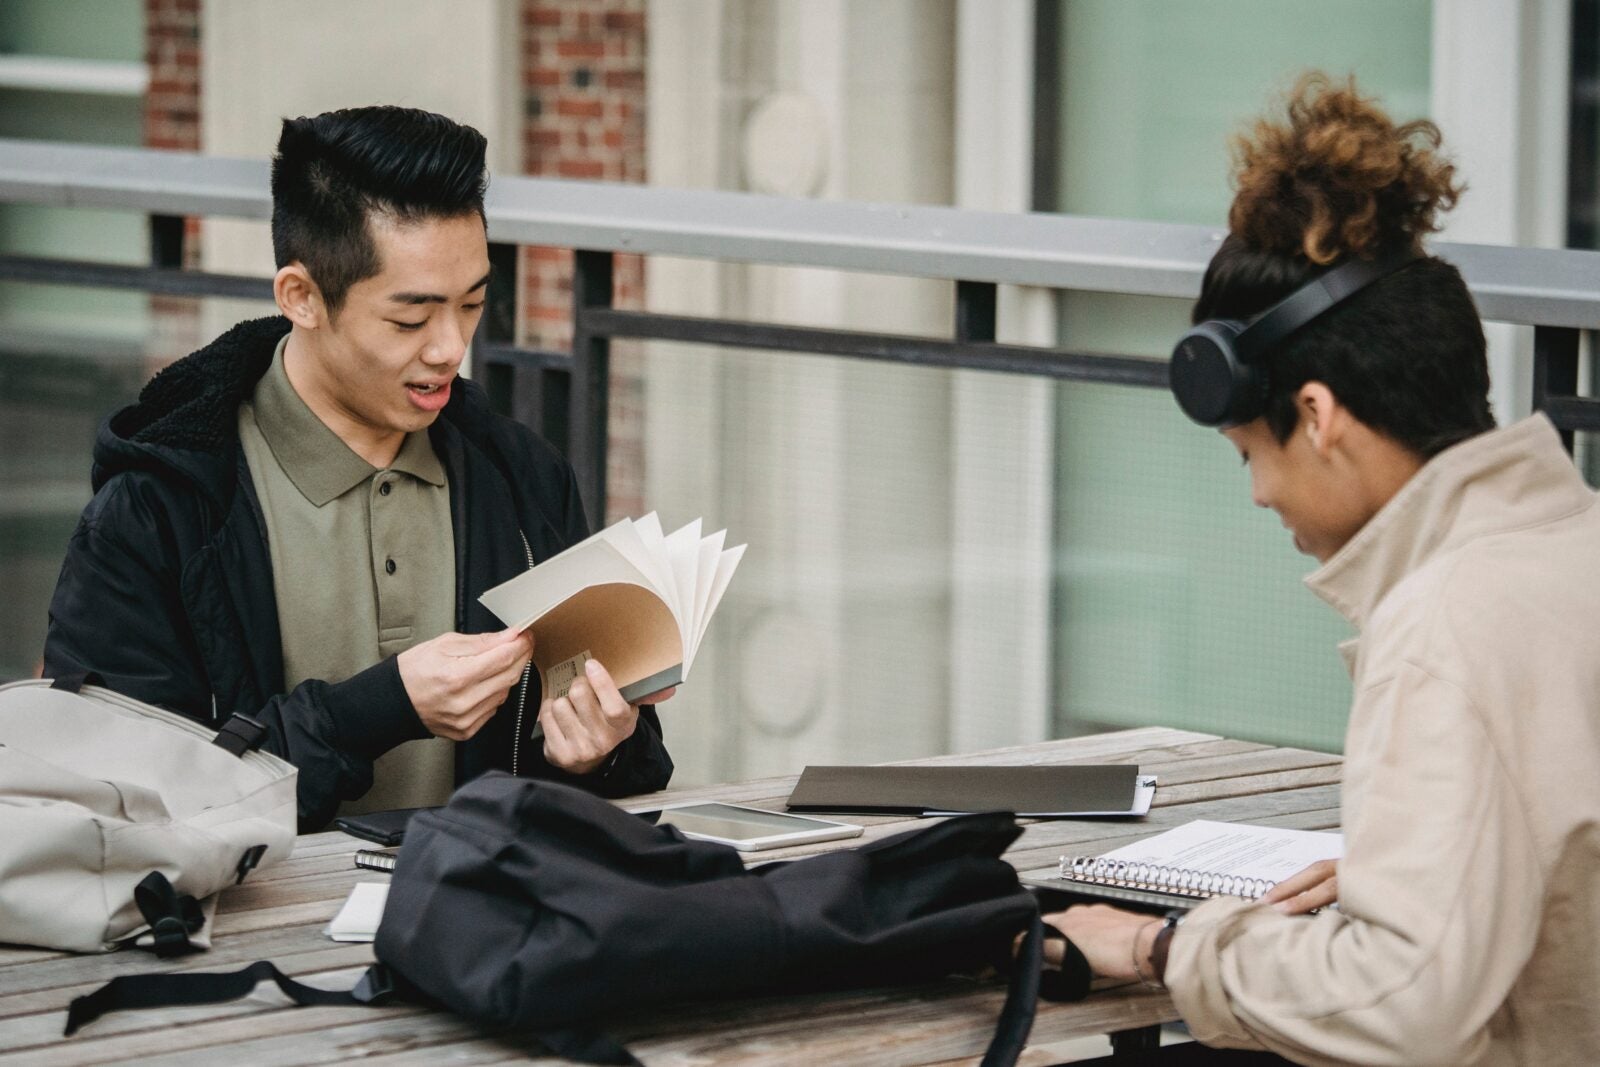 A young Asian man flips through a book while sitting at a table with a woman with curly hair and dark skin. 